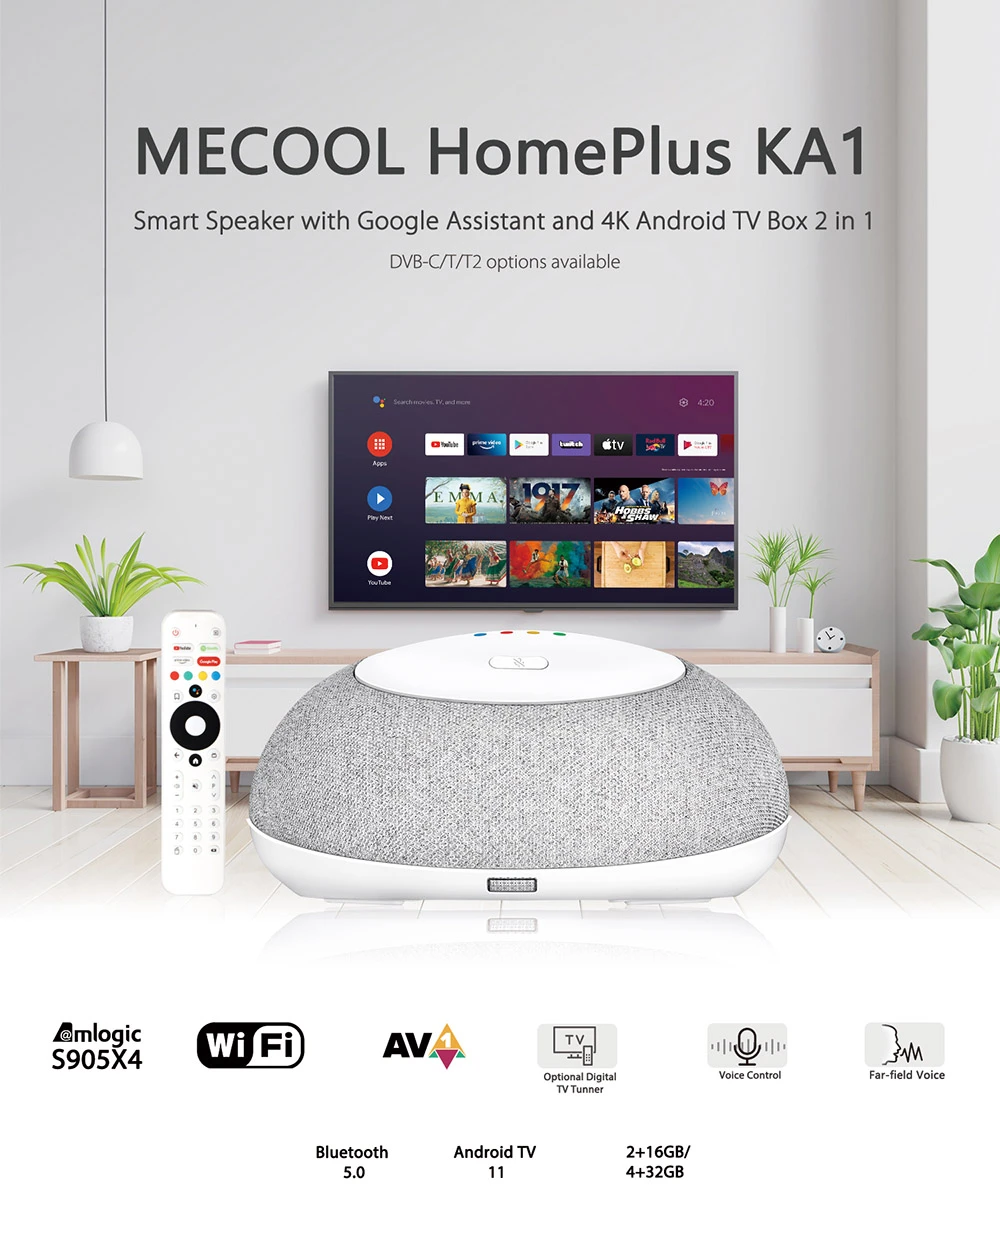 MECOOL KA1 Home Plus DVB Google Assistant Smart Home Controller with Android TV 4K Streaming Amlogic S905X4 4G/32G